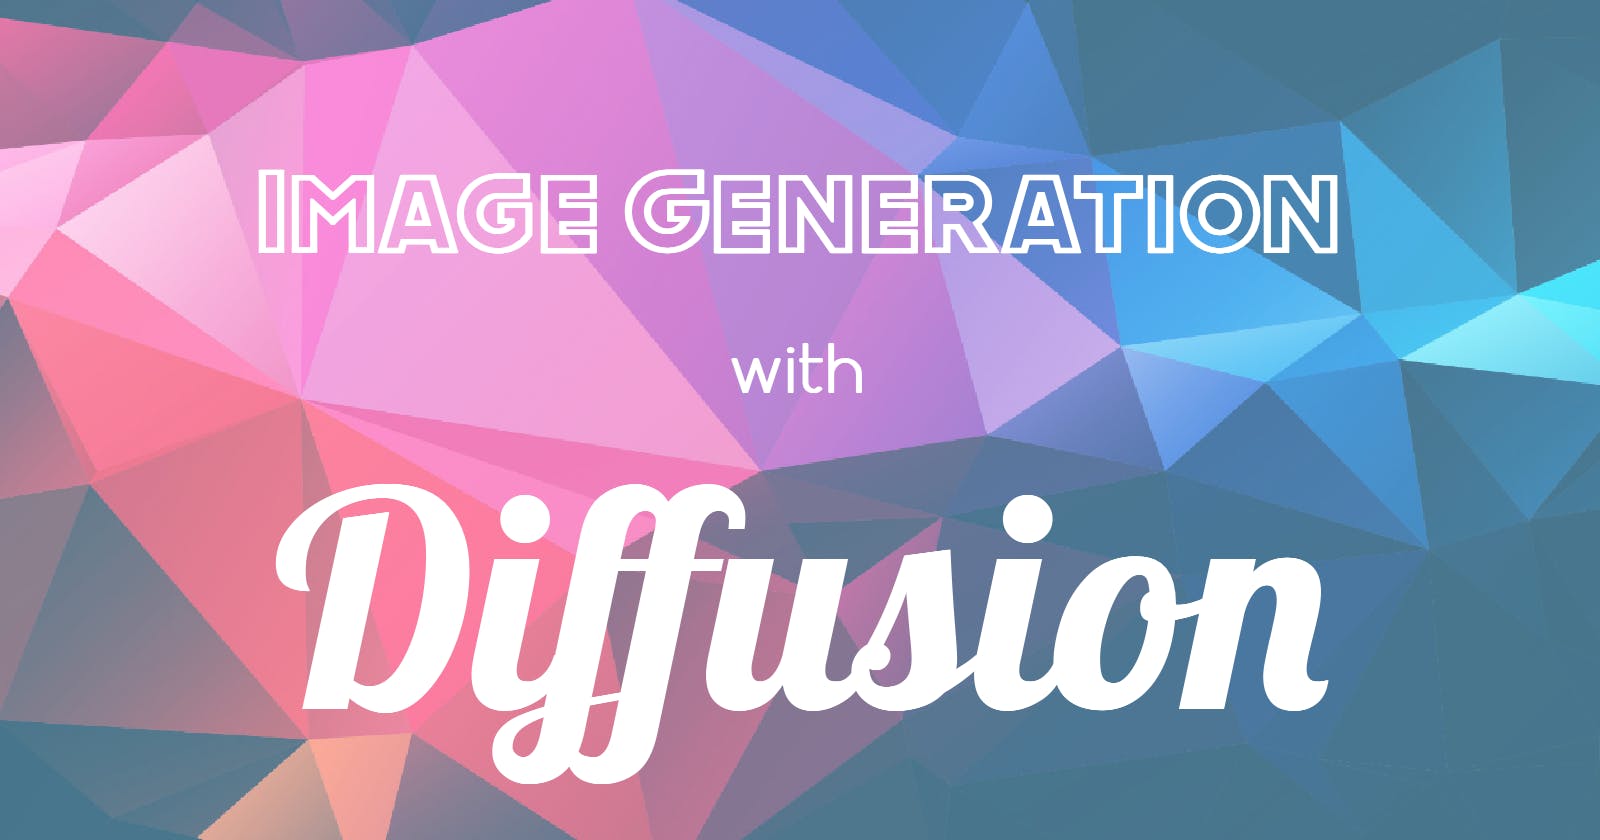 Understanding Image Generation with Diffusion